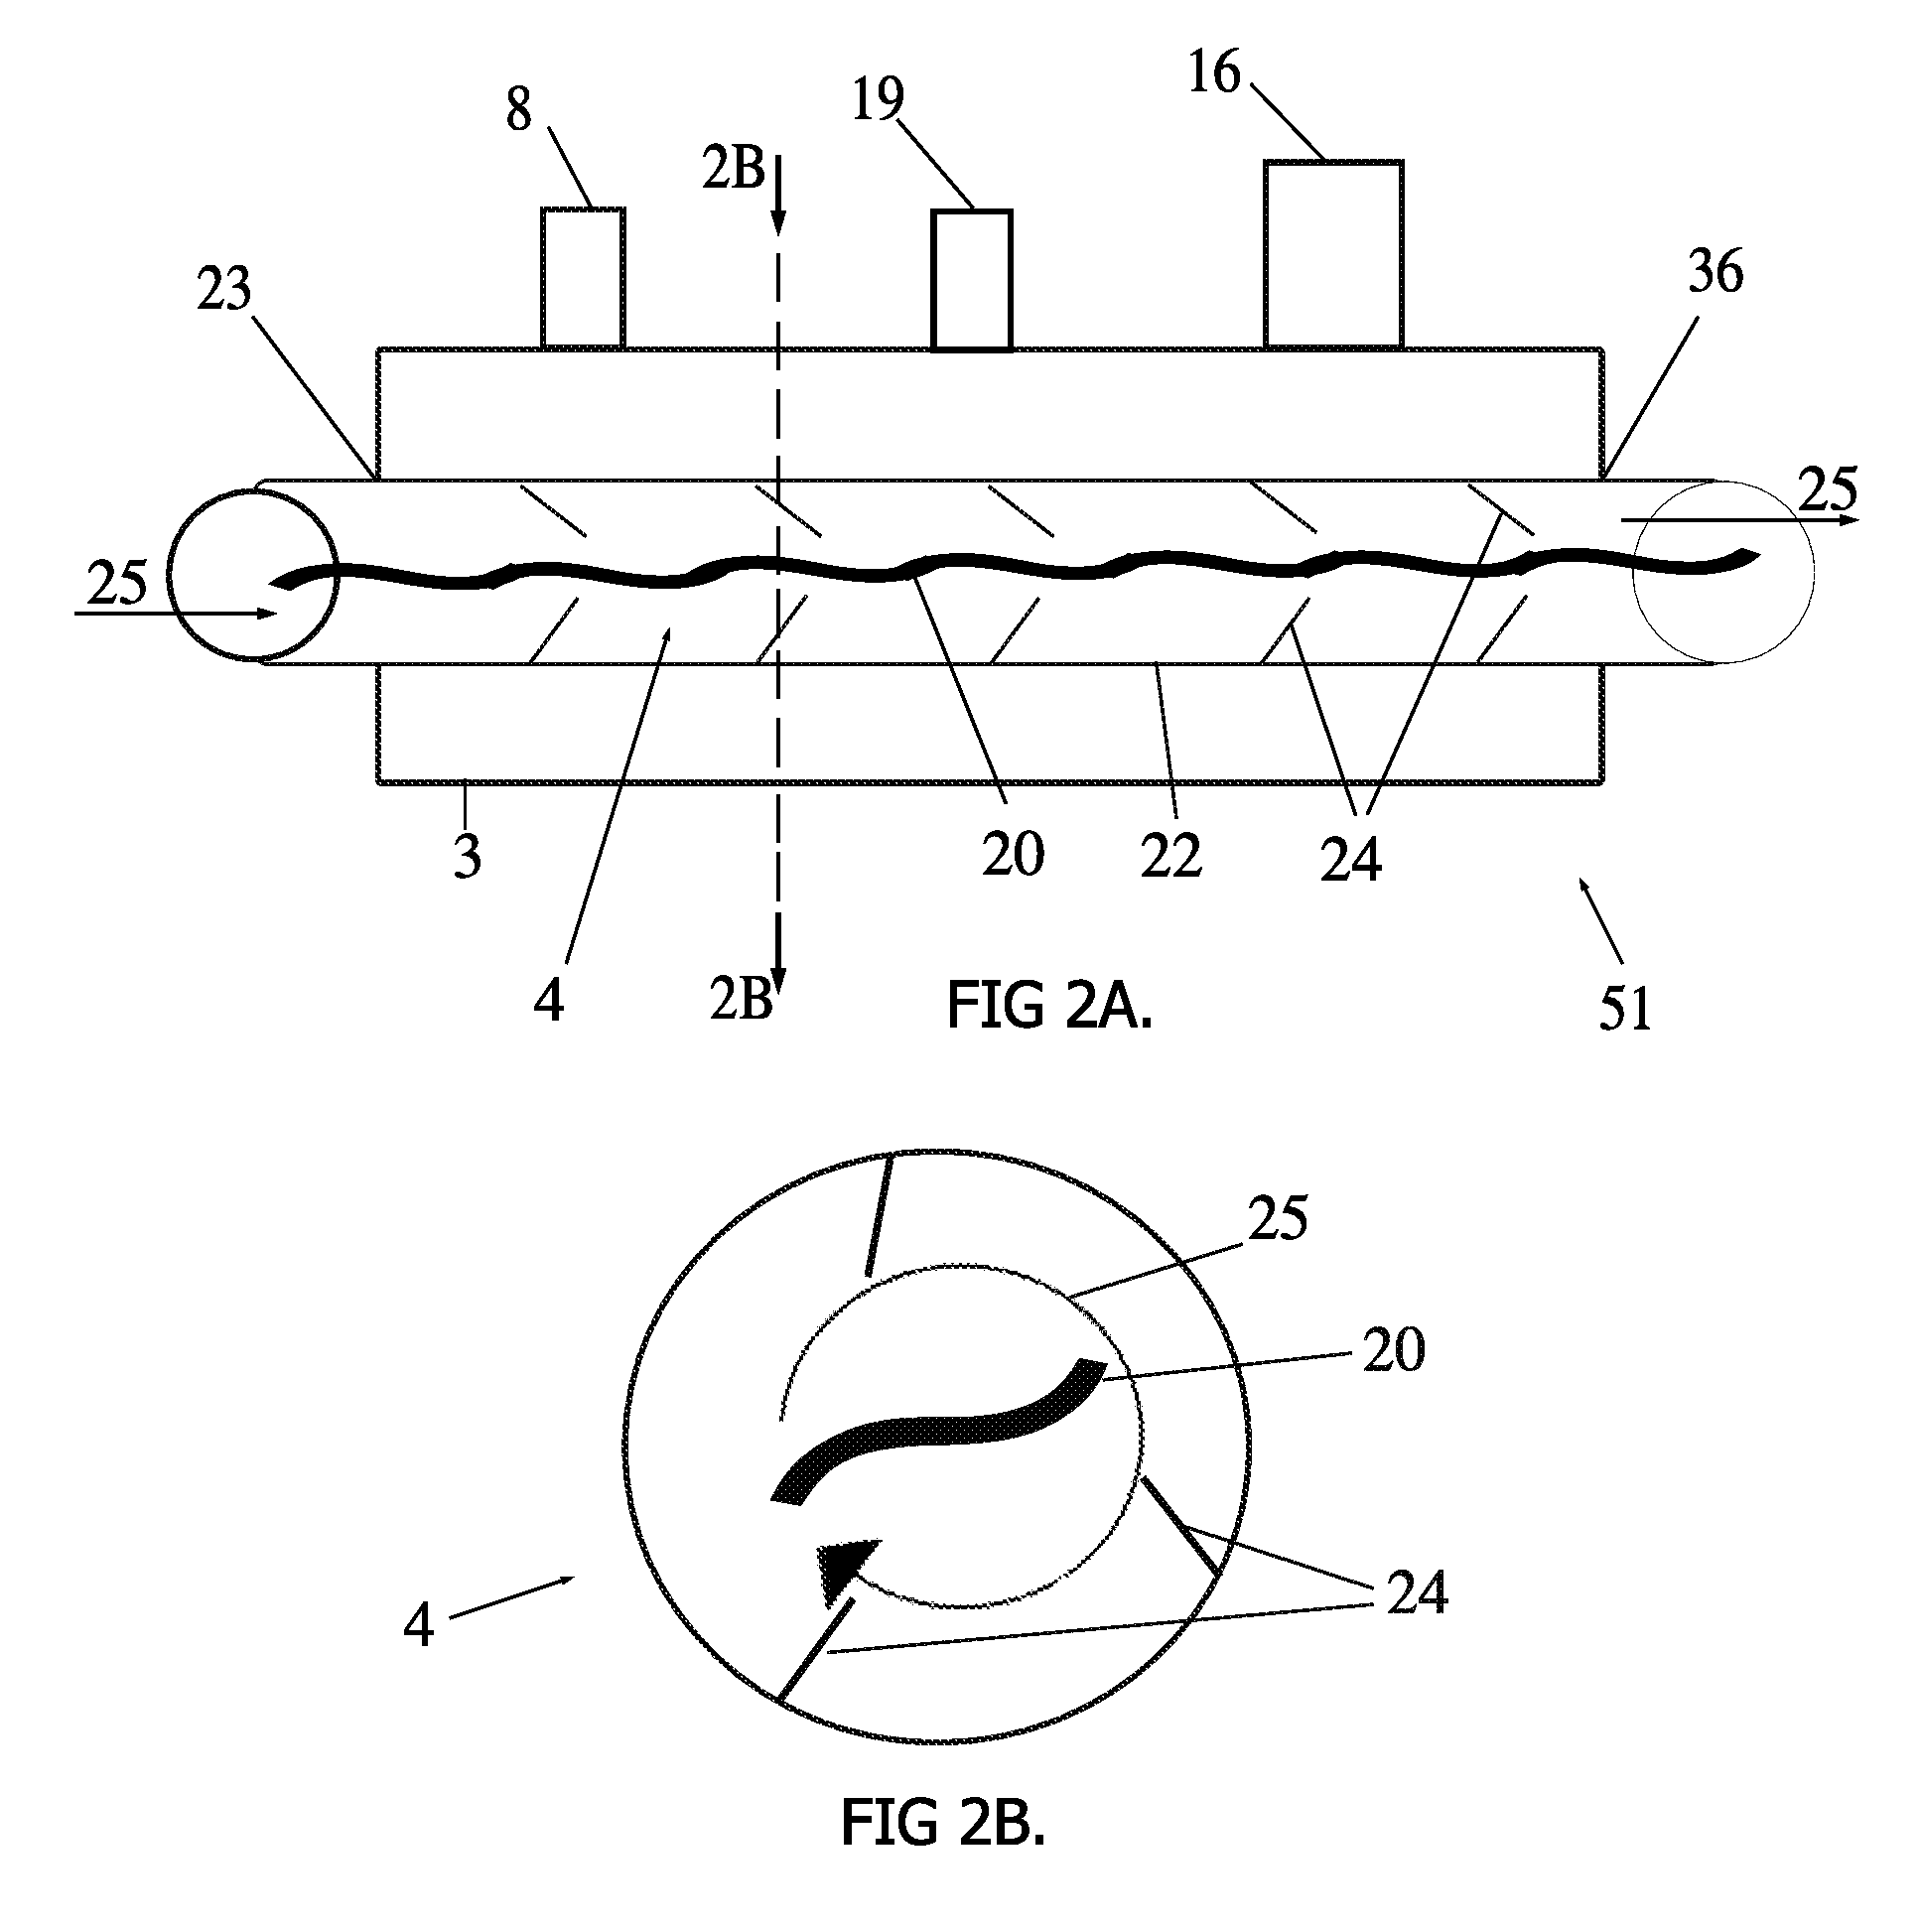 Modular pulsed pressure device for the transport of liquid cryogen to a cryoprobe